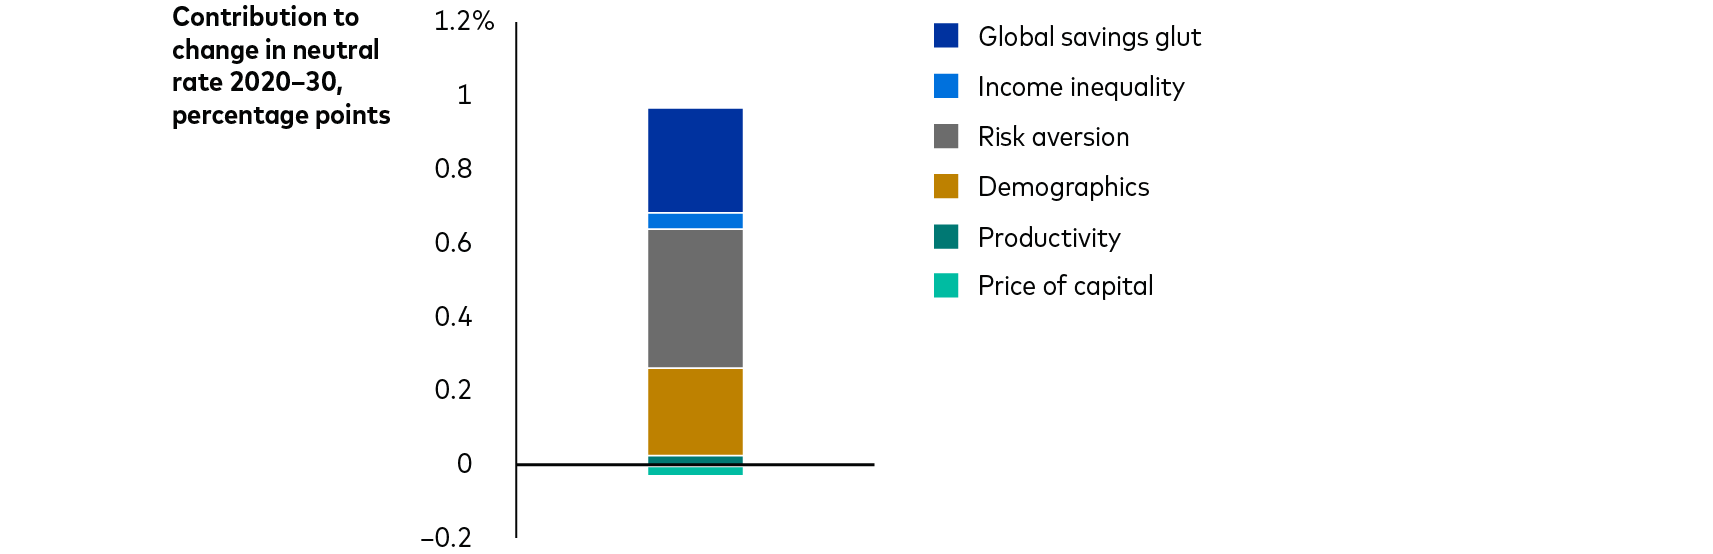 This decomposes the expected contribution from each variable in our model from 2022 to 2030. The largest contributors in our median neutral rate are the reduced global savings glut (0.28%), lower inequality (0.04%), lower risk aversion (0.37%), demographics (0.24%), higher productivity growth (0.025%), and relative price of capital (–0.02%). 